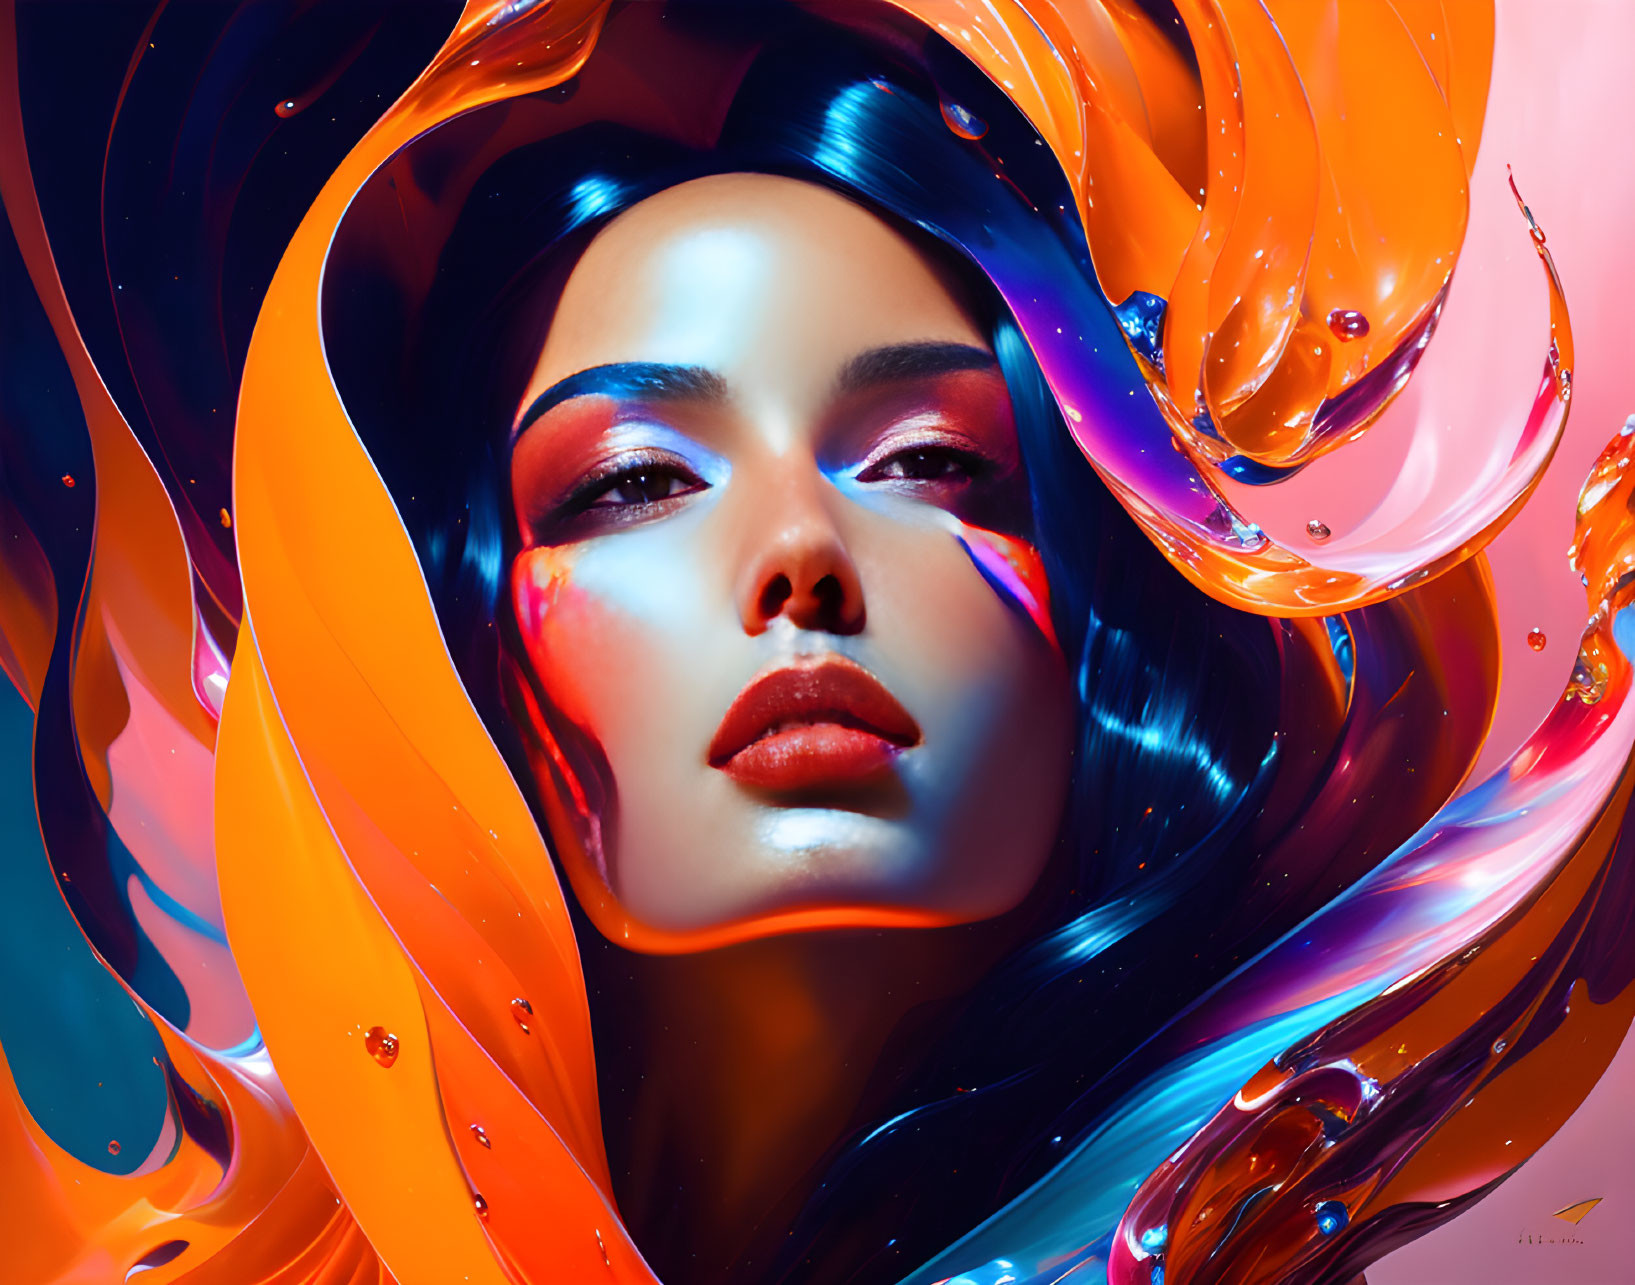 Colorful digital portrait of a woman with swirling blue, orange, and red hues